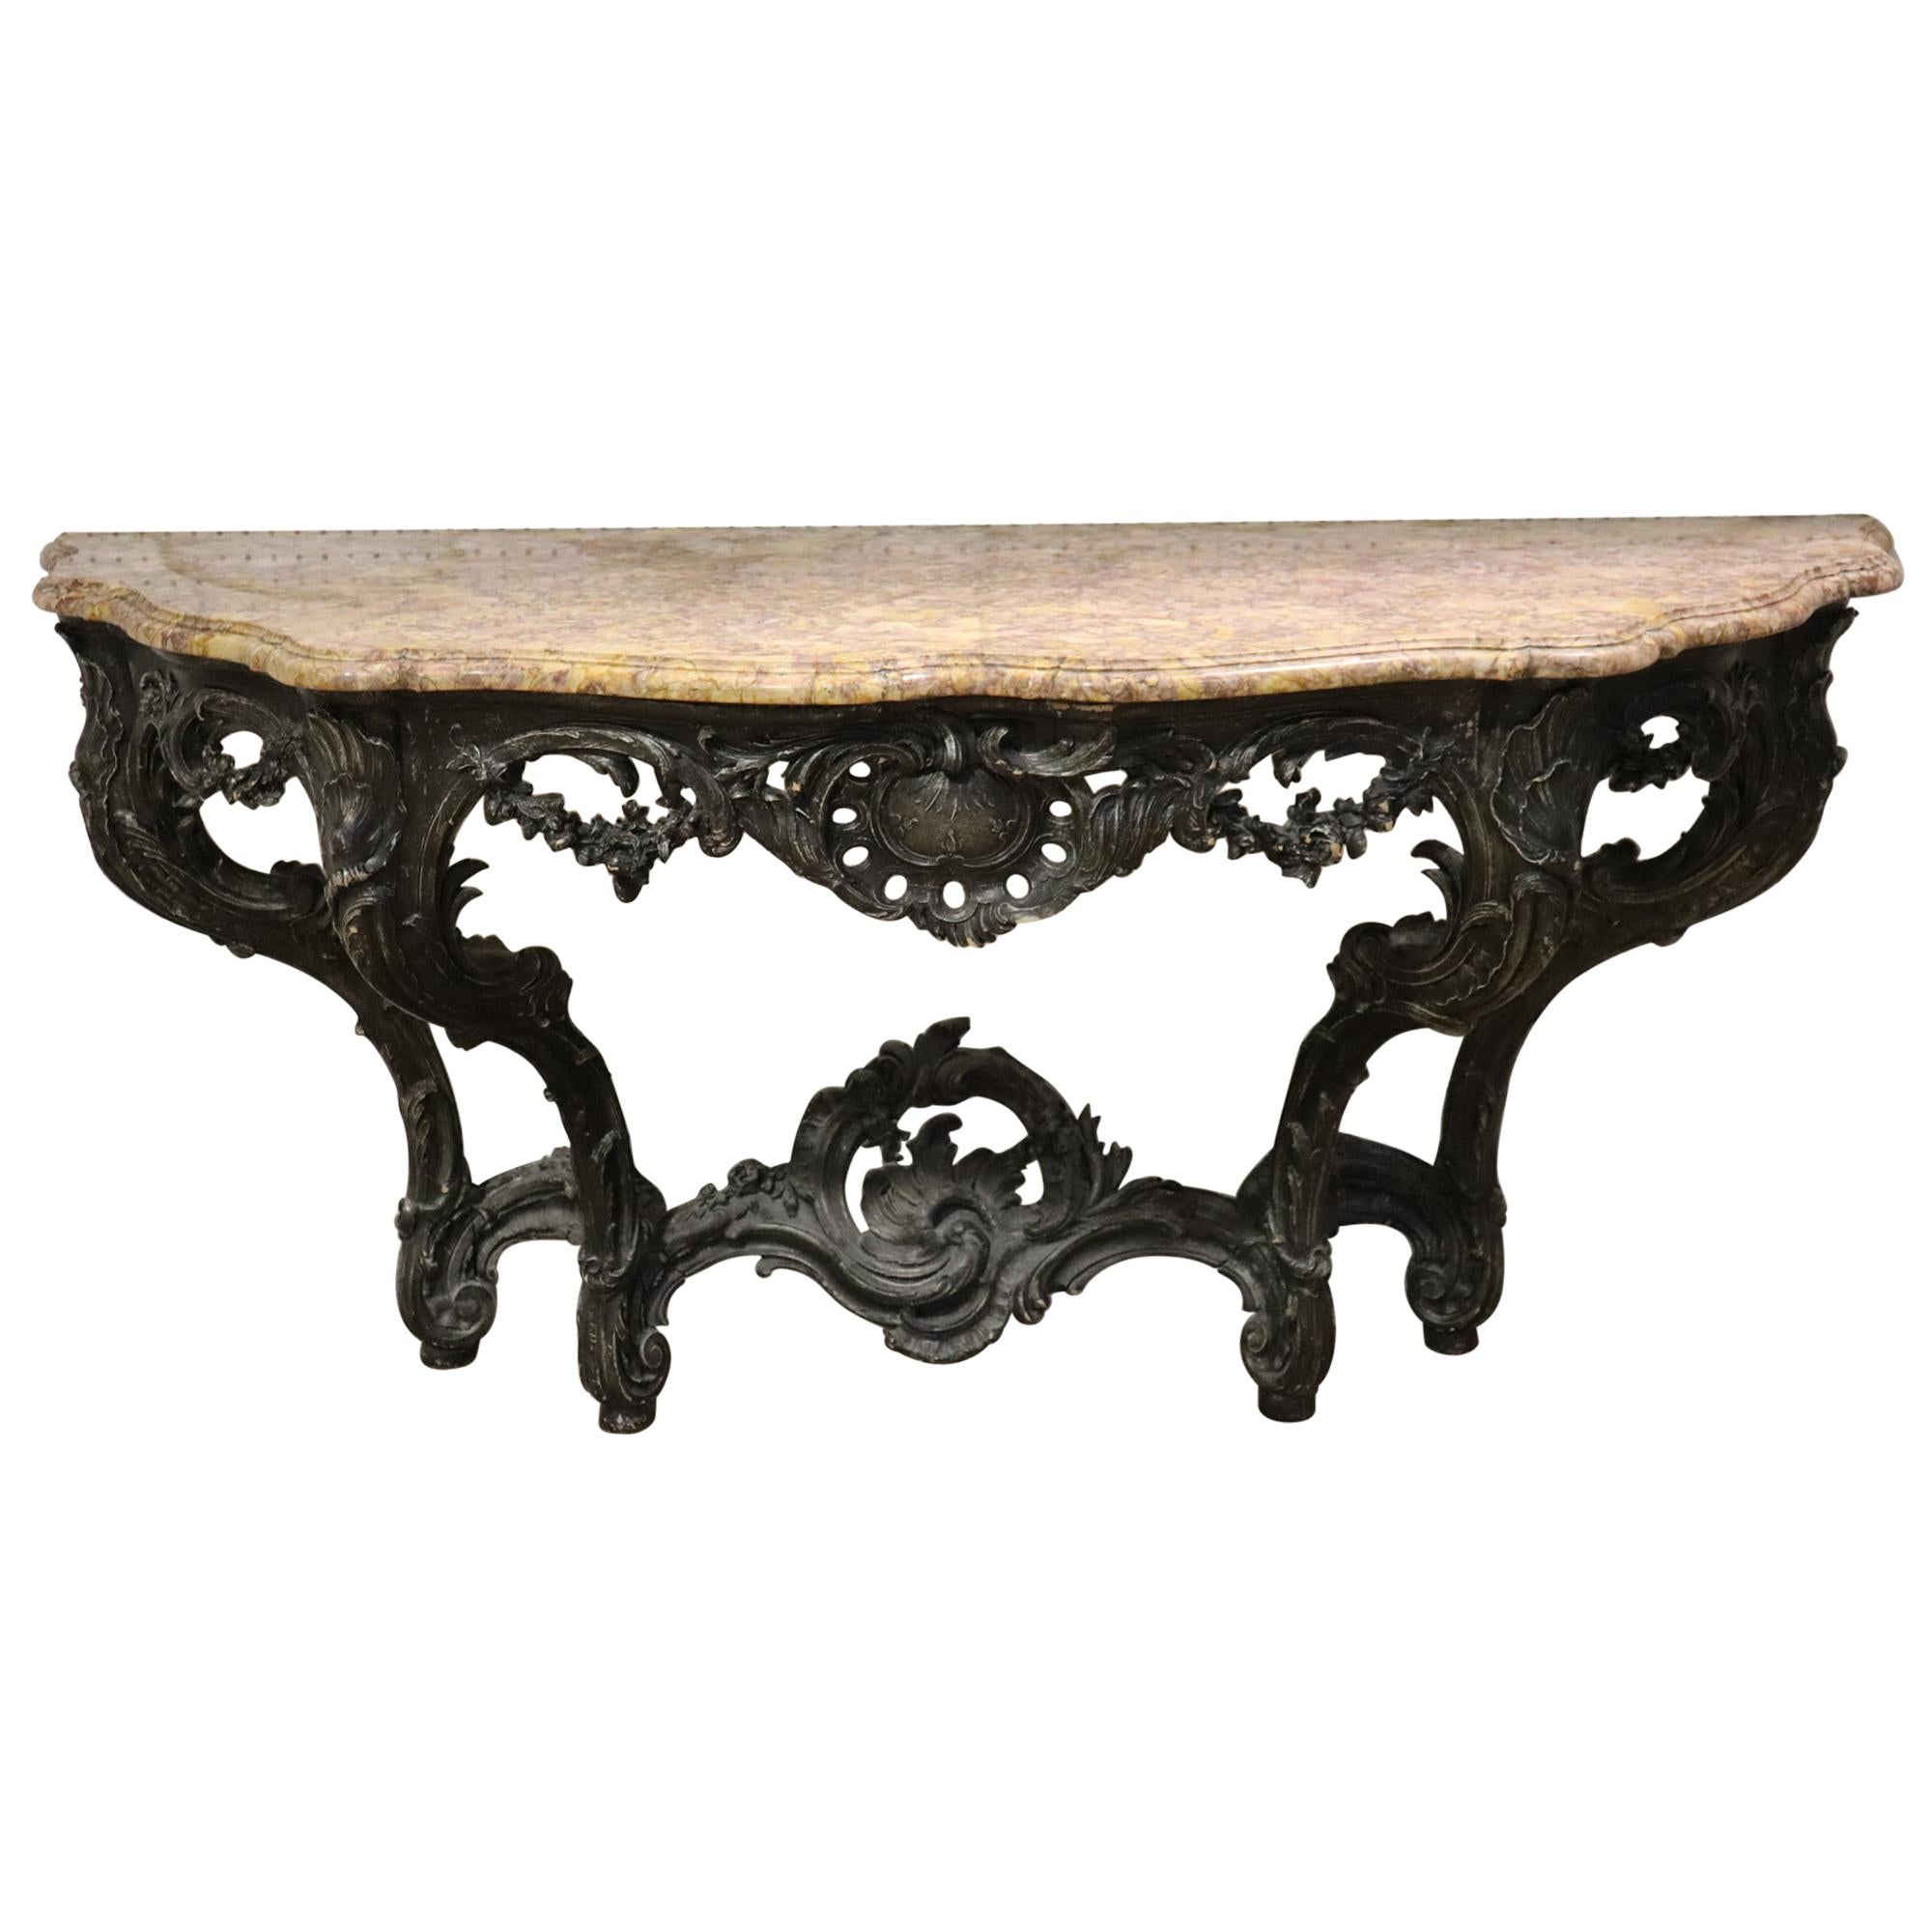 French Rococo Marble-Top Wall Mounted Console Table with Ebonized Finish C1890